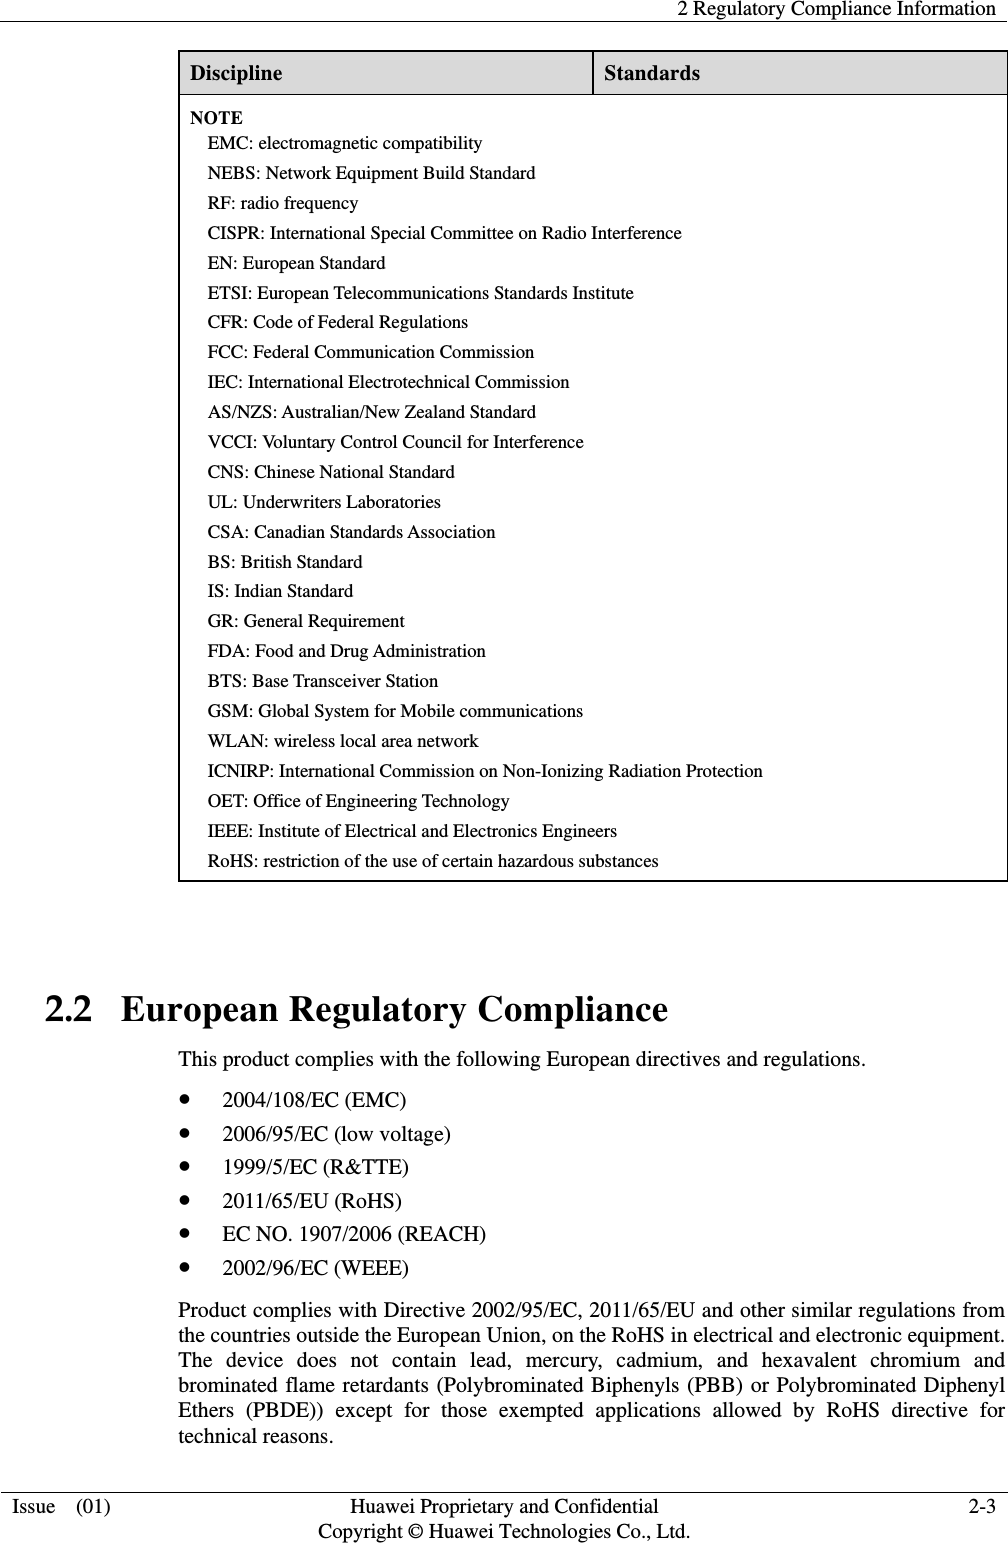    2 Regulatory Compliance Information Issue  (01)  Huawei Proprietary and Confidential     Copyright © Huawei Technologies Co., Ltd. 2-3 Discipline  Standards NOTE EMC: electromagnetic compatibility NEBS: Network Equipment Build Standard RF: radio frequency CISPR: International Special Committee on Radio Interference EN: European Standard ETSI: European Telecommunications Standards Institute CFR: Code of Federal Regulations FCC: Federal Communication Commission IEC: International Electrotechnical Commission AS/NZS: Australian/New Zealand Standard VCCI: Voluntary Control Council for Interference CNS: Chinese National Standard UL: Underwriters Laboratories CSA: Canadian Standards Association BS: British Standard IS: Indian Standard GR: General Requirement FDA: Food and Drug Administration BTS: Base Transceiver Station GSM: Global System for Mobile communications WLAN: wireless local area network ICNIRP: International Commission on Non-Ionizing Radiation Protection OET: Office of Engineering Technology IEEE: Institute of Electrical and Electronics Engineers RoHS: restriction of the use of certain hazardous substances  2.2   European Regulatory Compliance This product complies with the following European directives and regulations. z 2004/108/EC (EMC) z 2006/95/EC (low voltage) z 1999/5/EC (R&amp;TTE) z 2011/65/EU (RoHS) z EC NO. 1907/2006 (REACH) z 2002/96/EC (WEEE) Product complies with Directive 2002/95/EC, 2011/65/EU and other similar regulations from the countries outside the European Union, on the RoHS in electrical and electronic equipment. The device does not contain lead, mercury, cadmium, and hexavalent chromium and brominated flame retardants (Polybrominated Biphenyls (PBB) or Polybrominated Diphenyl Ethers (PBDE)) except for those exempted applications allowed by RoHS directive for technical reasons.   